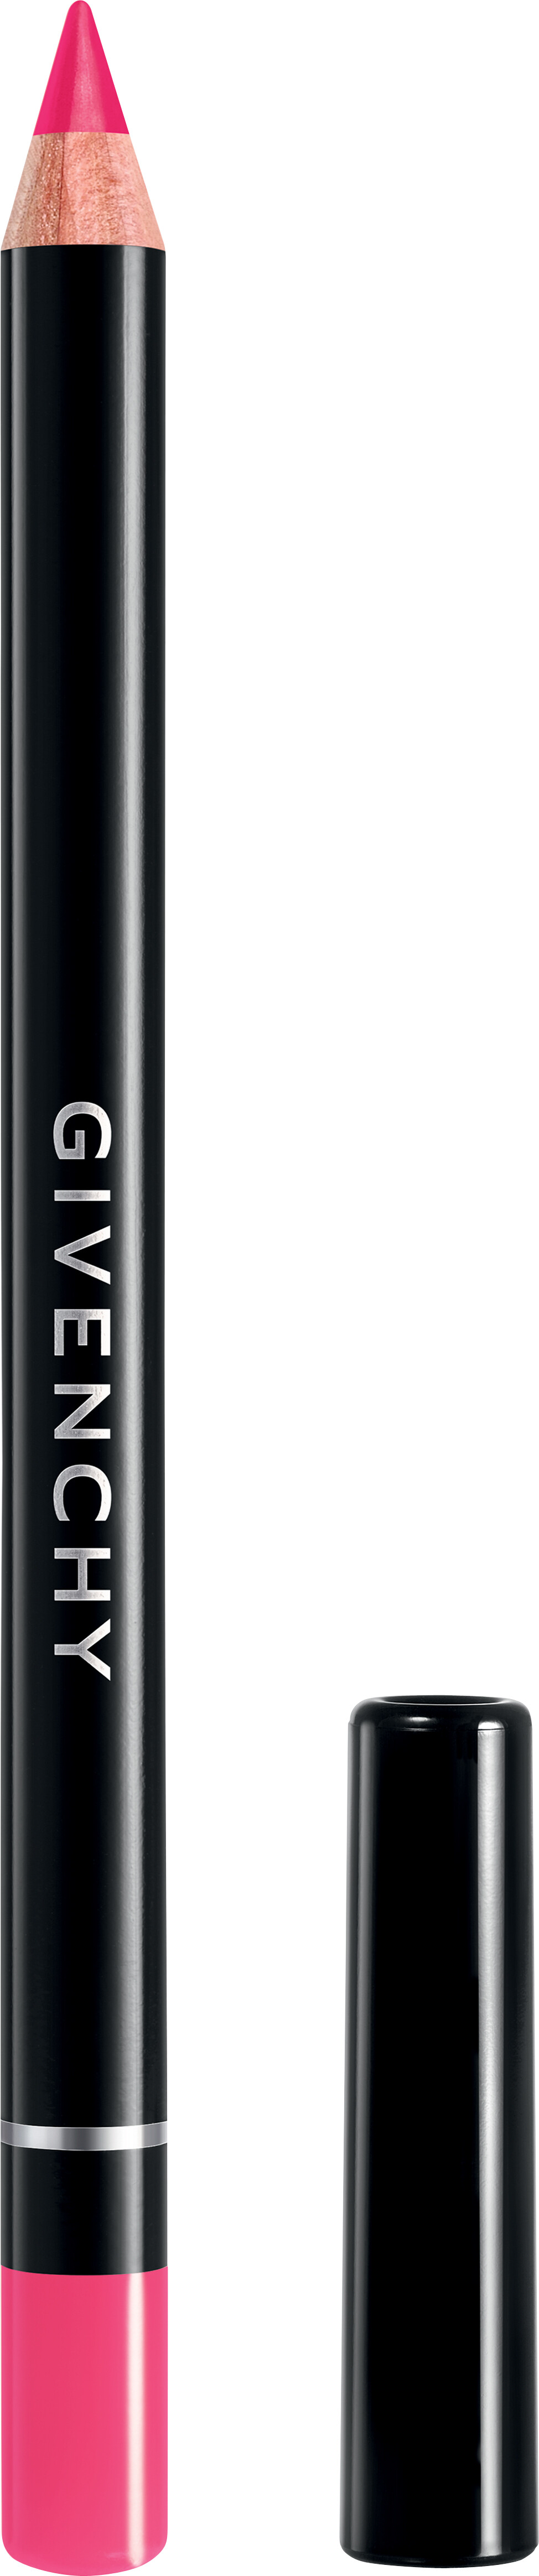 GIVENCHY Lip Liner With Sharpener 1.1g 04 - Fuchsia Irresistible